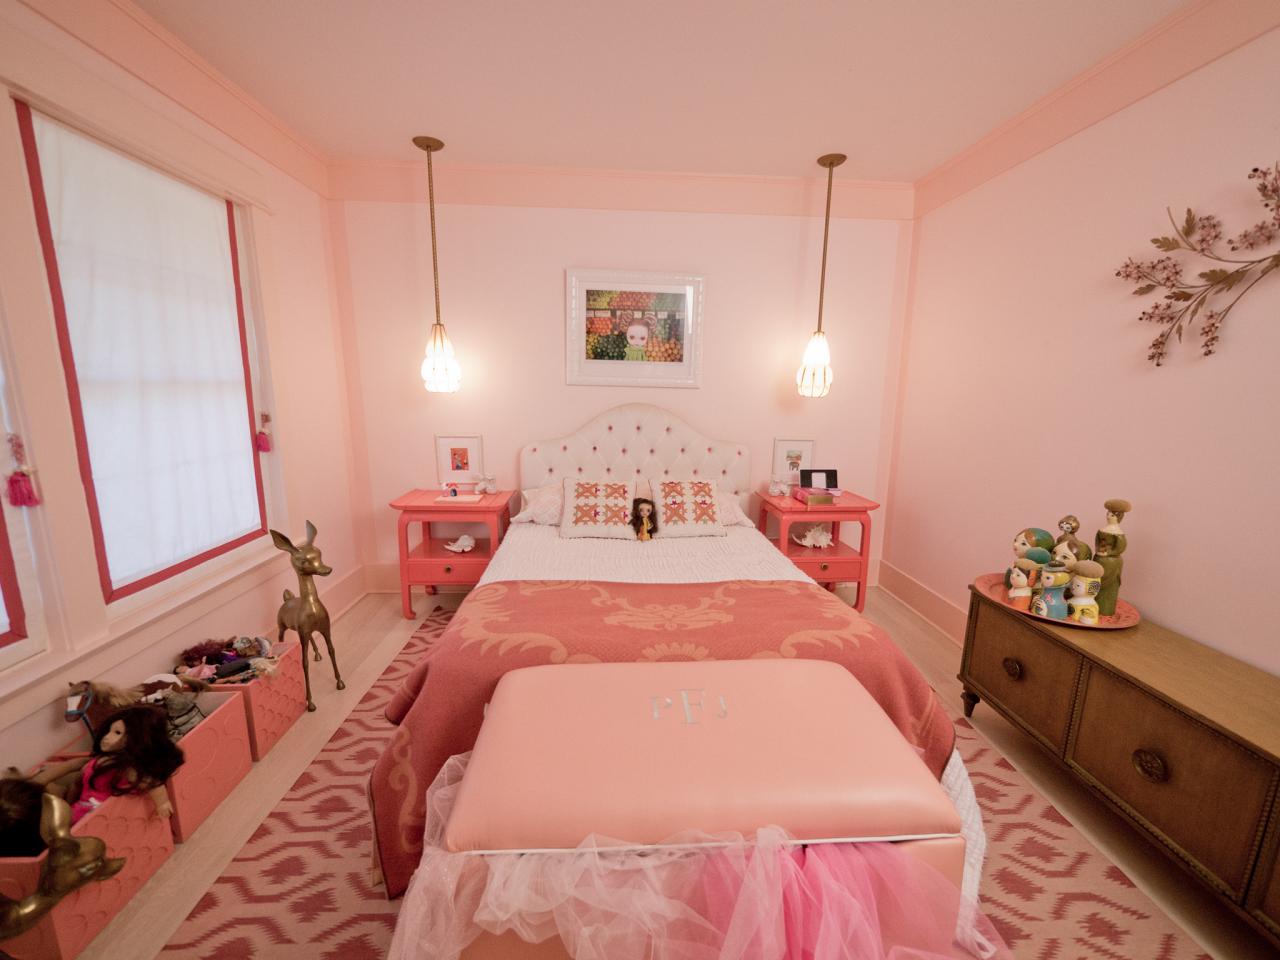 Girls Bedroom Color Schemes Pictures Options Ideas HGTV